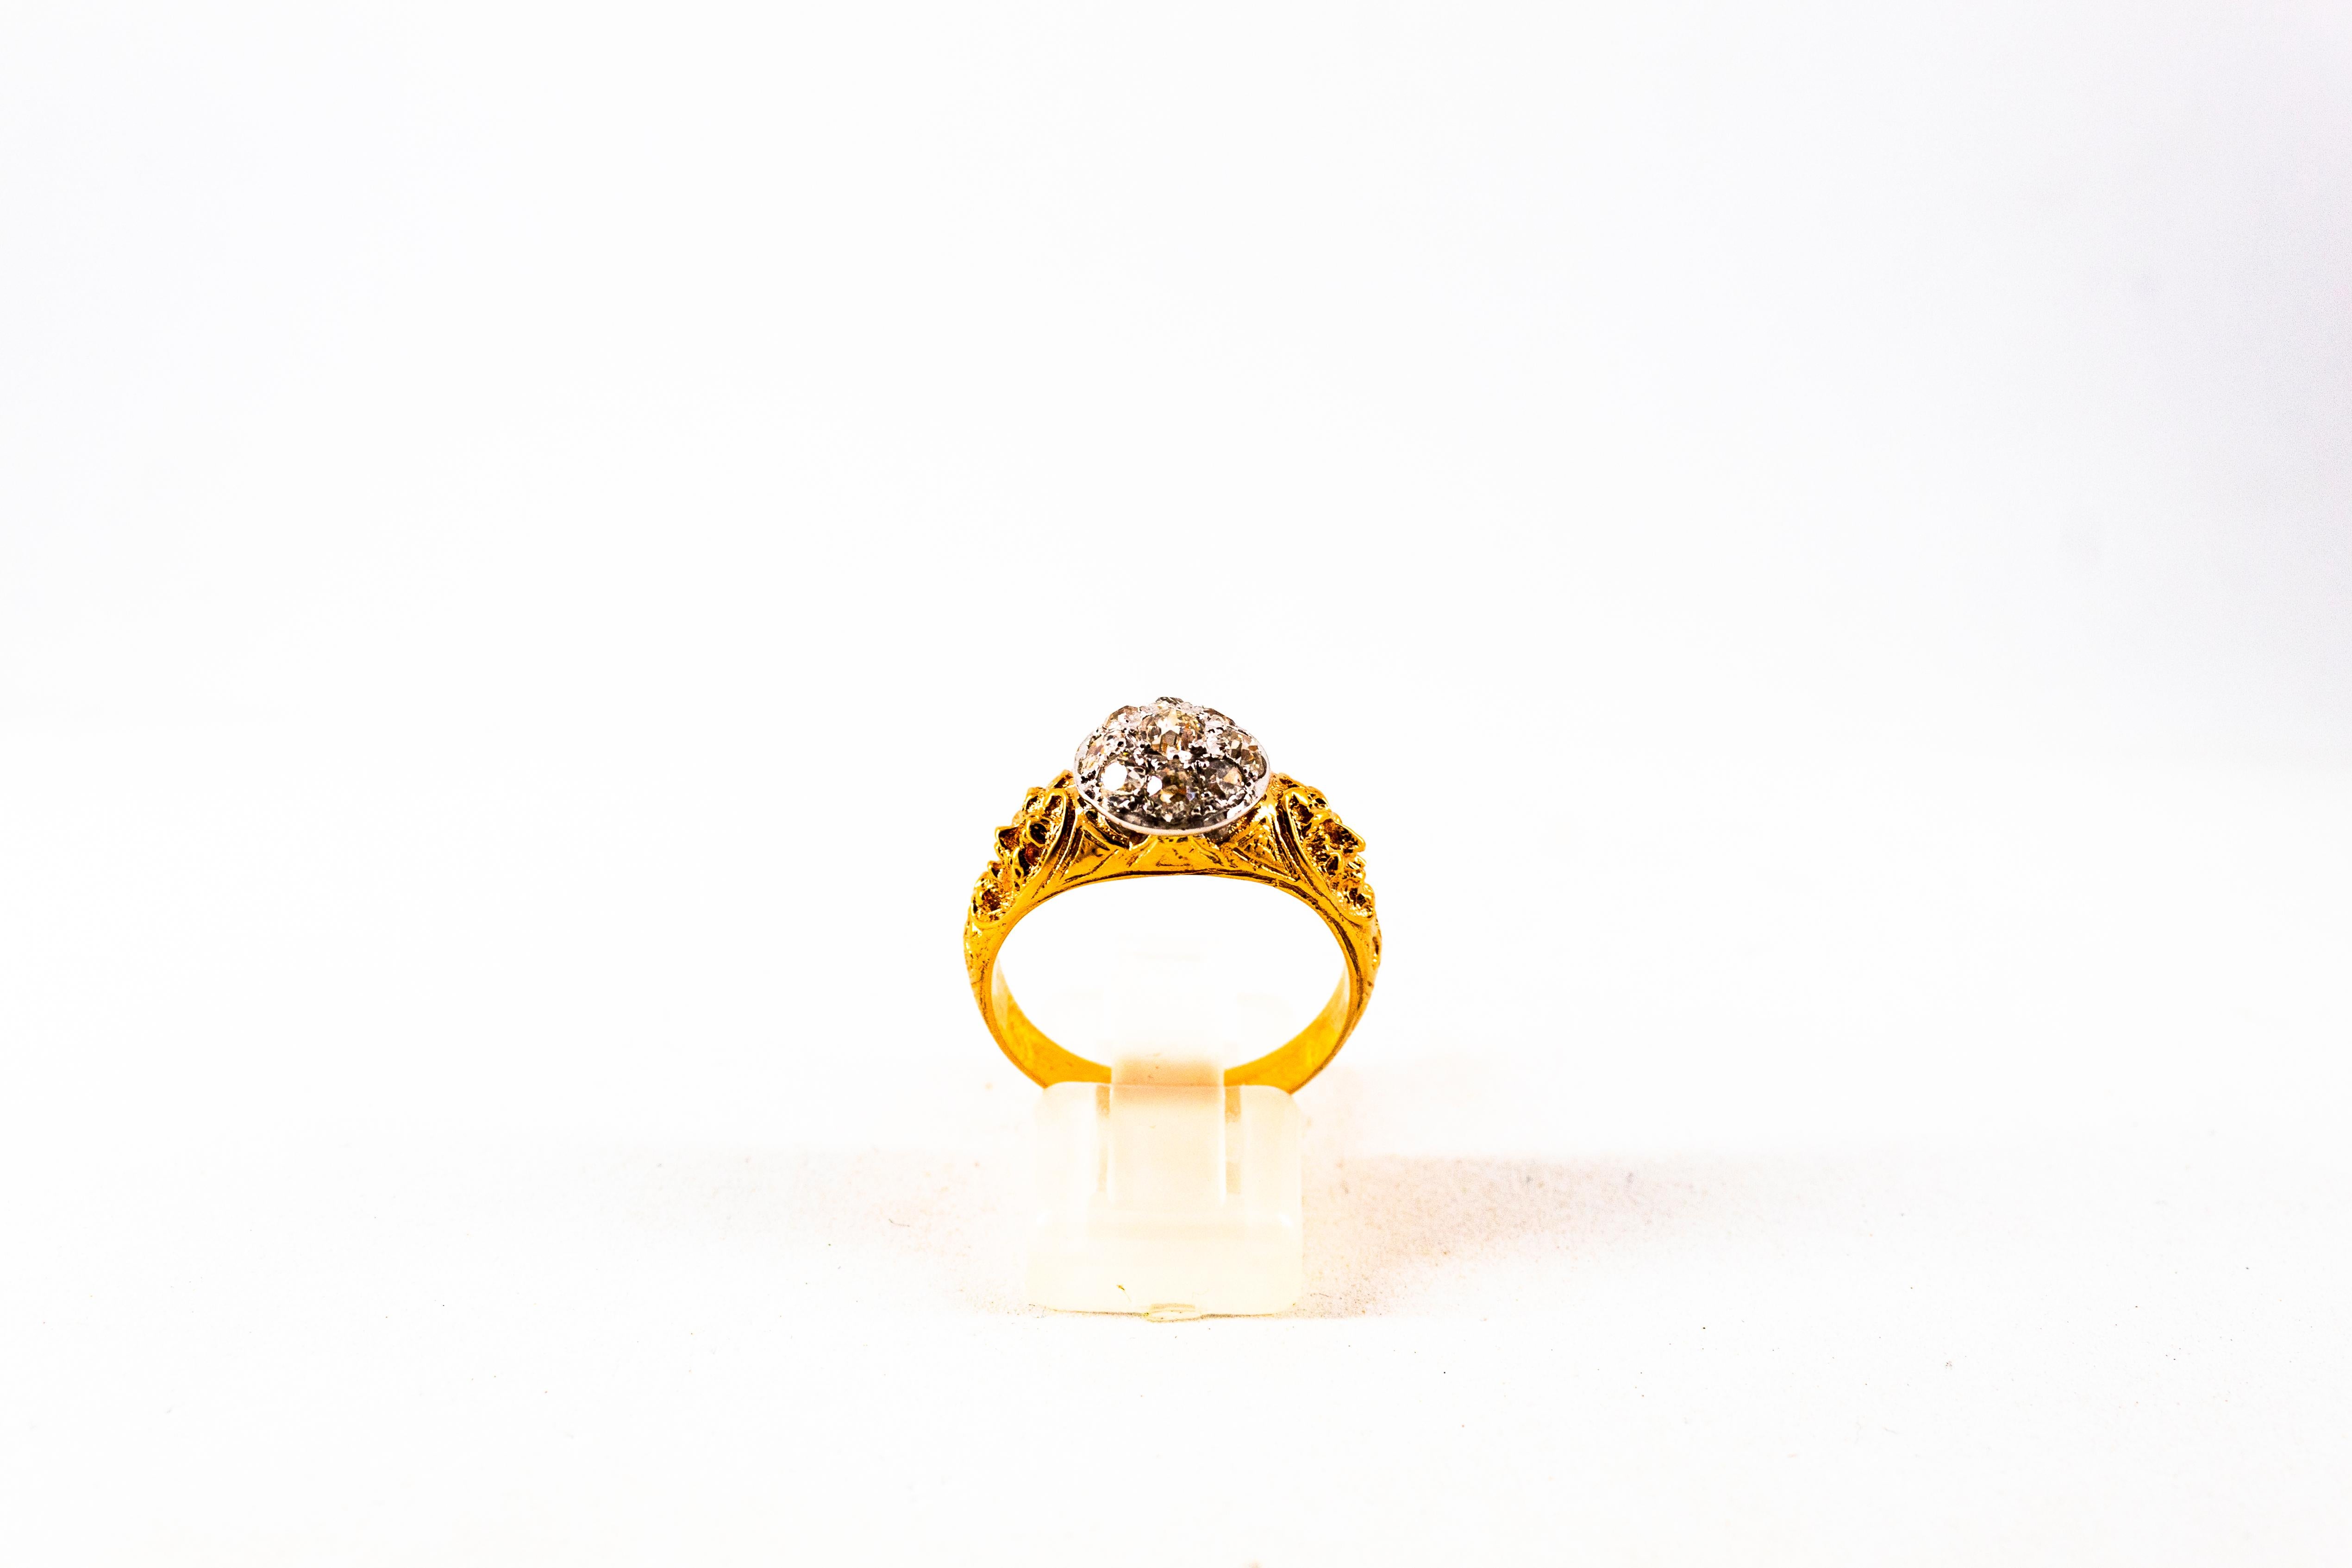 This Ring is made of 14K Yellow Gold.
This Ring has 0.80 Carats White Old European Cut Diamonds.
Size ITA: 18 1/2 USA: 8 1/2
We're a workshop so every piece is handmade, customizable and resizable.